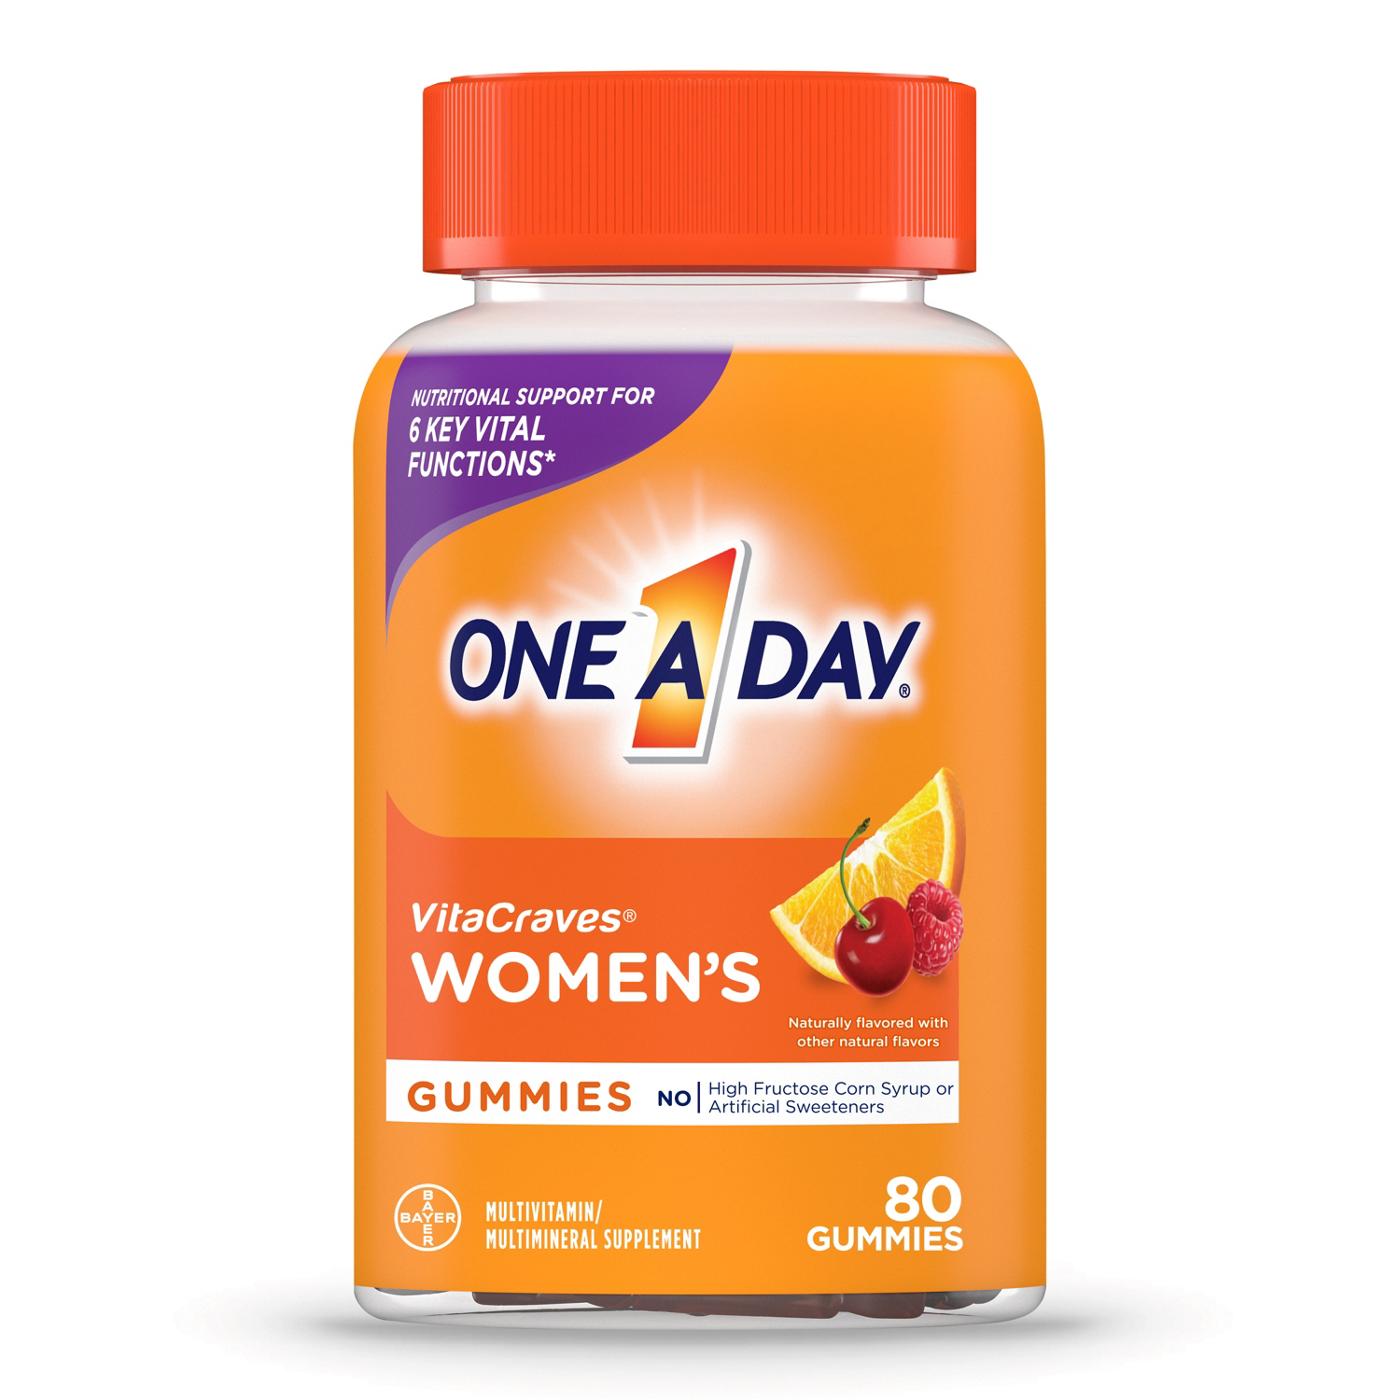 One A Day Women's VitaCraves Multivitamin Gummies; image 1 of 3